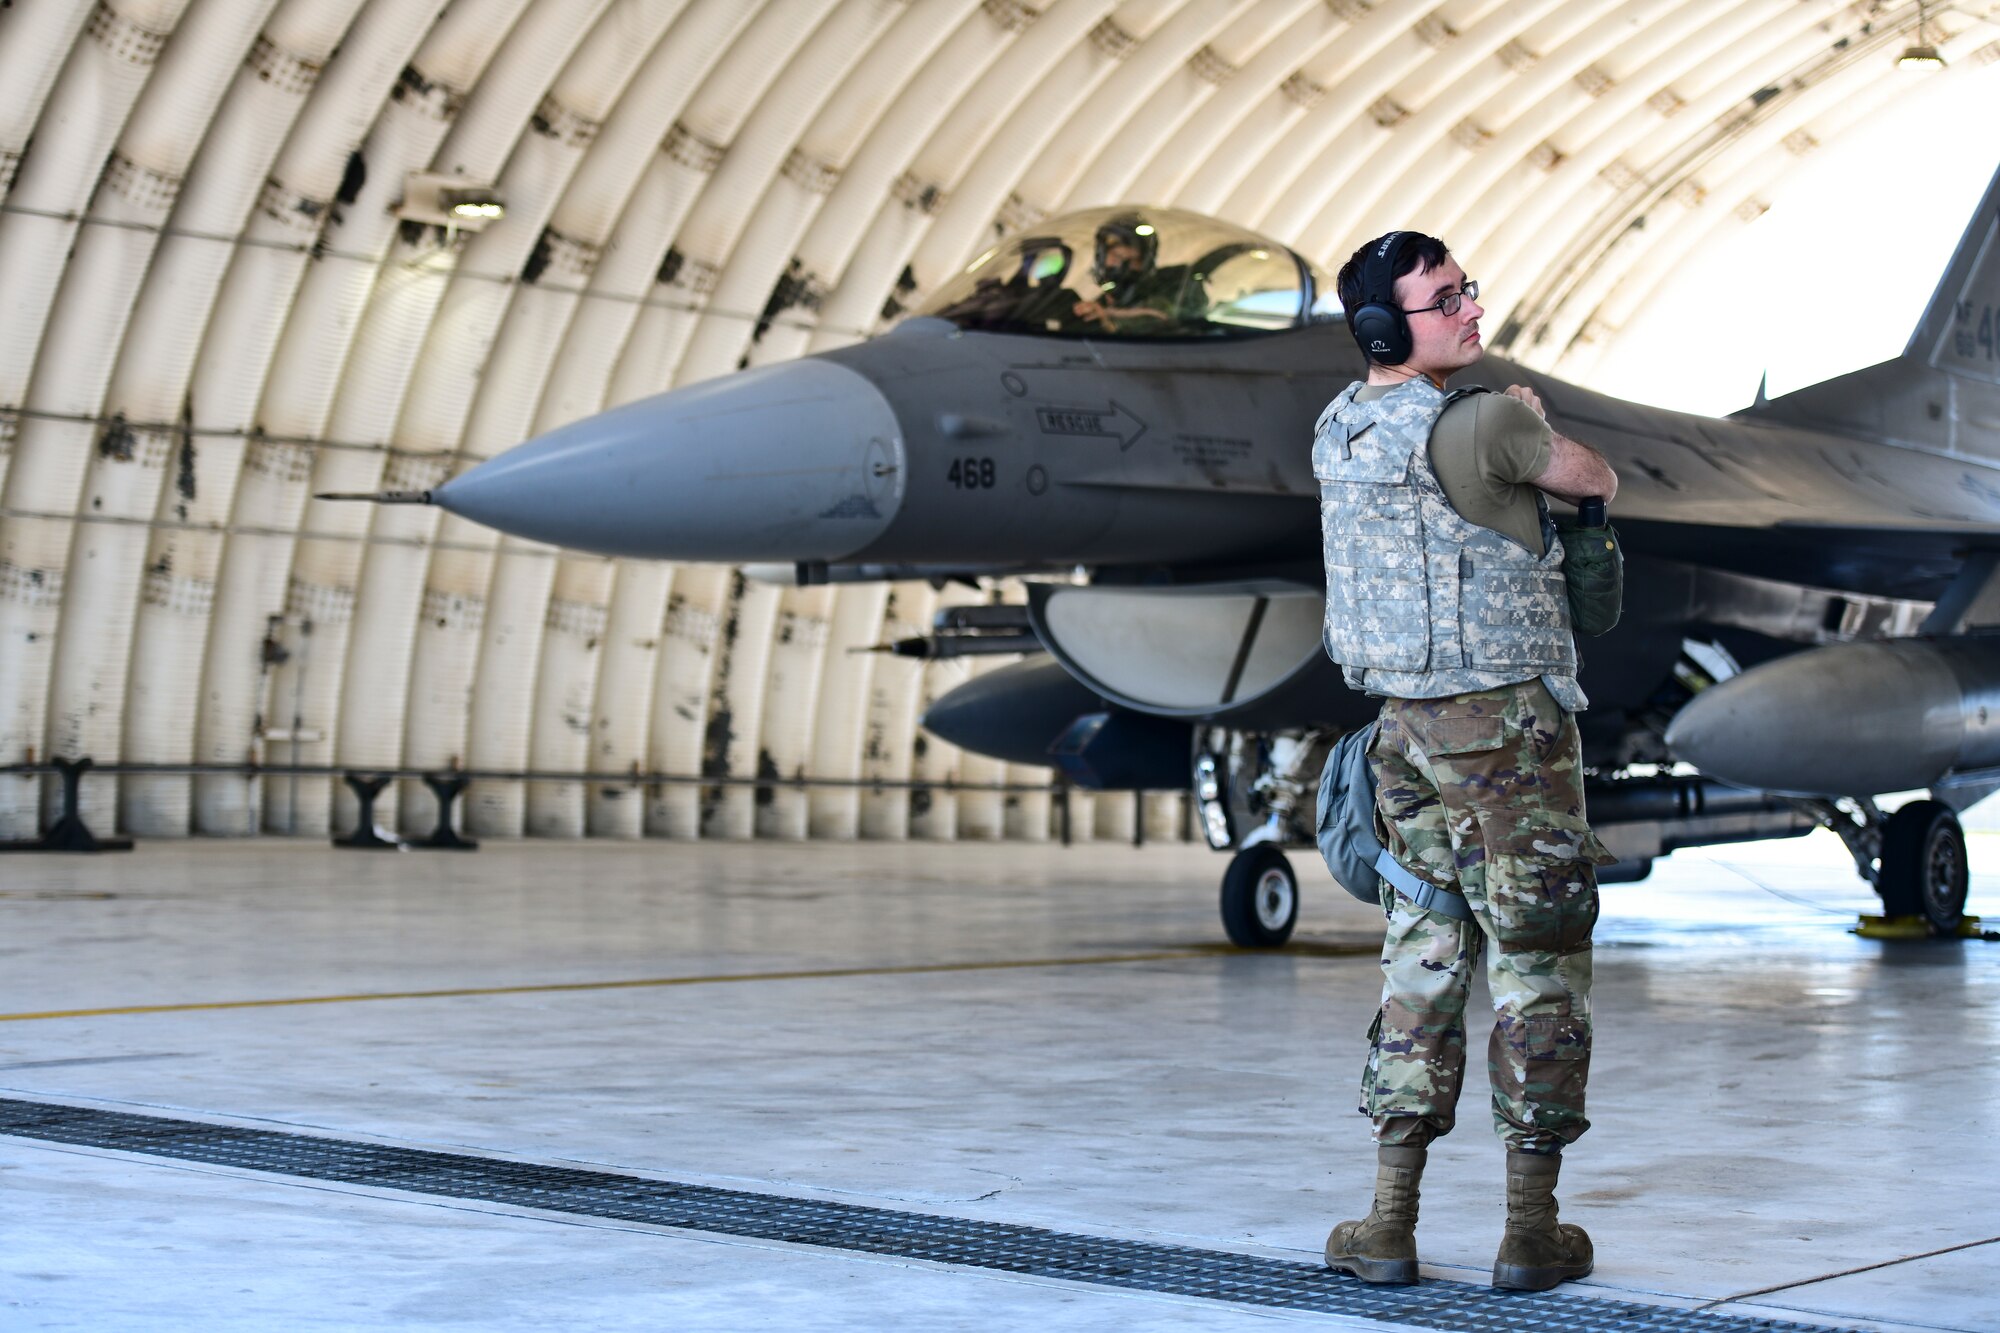 A maintainer prepares to marshal a jet.